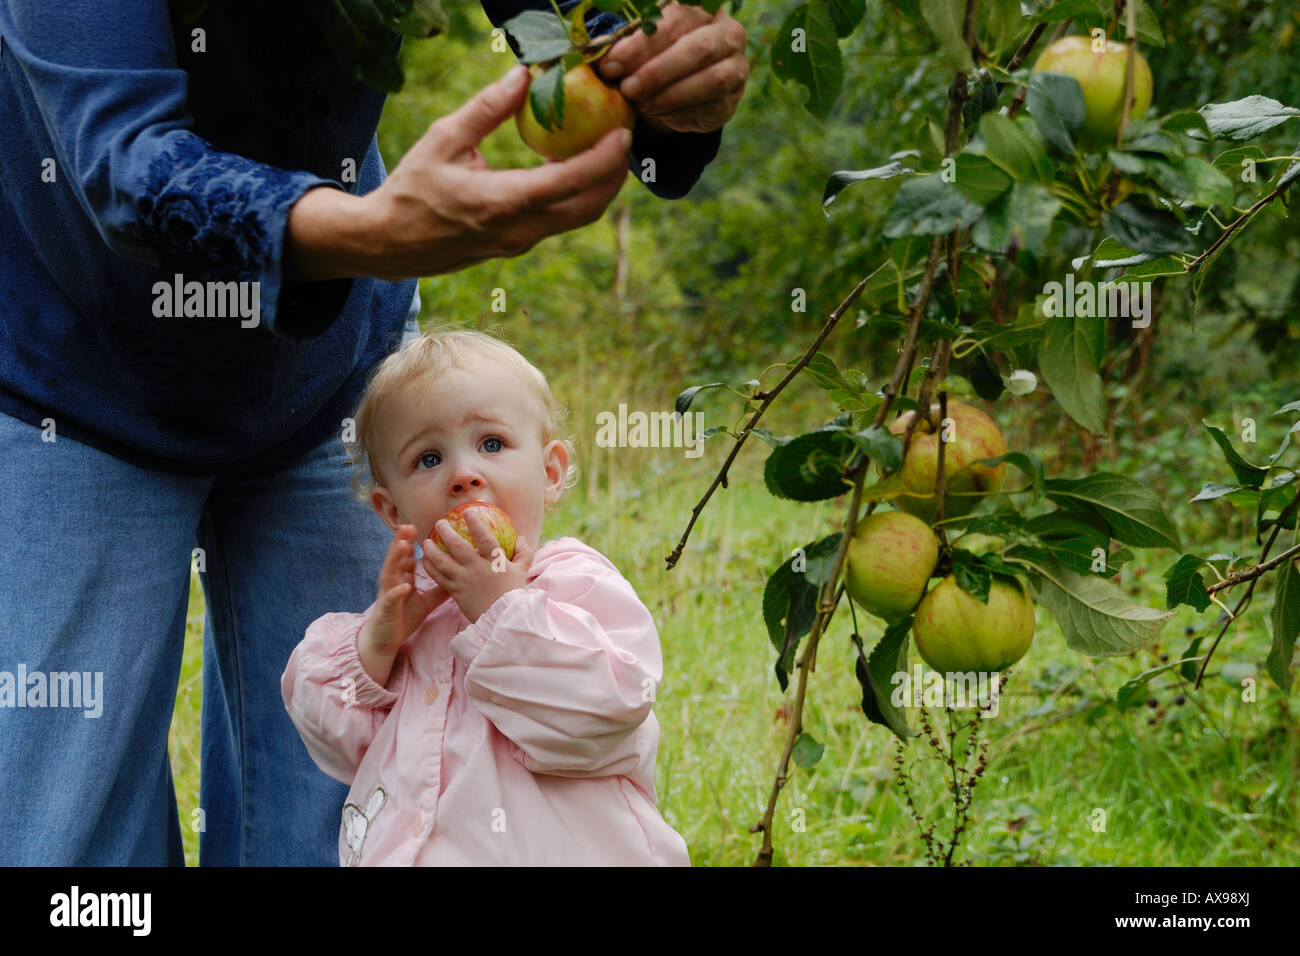 Toddler watching an adult picking apples while eating an apple, Wales, UK. Stock Photo